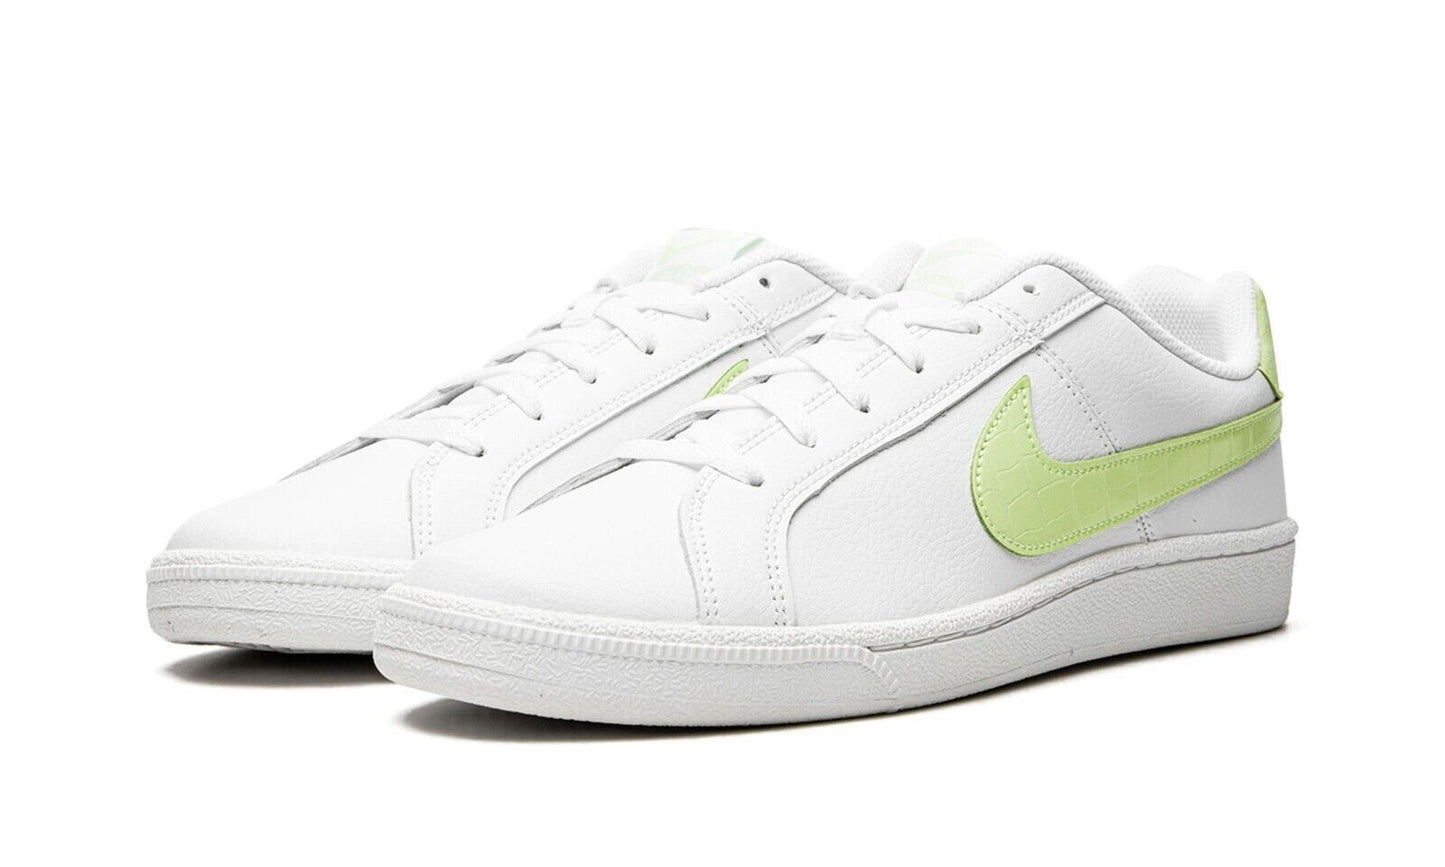 Women's Nike Court Royale Casual Shoes, 749867 121 Multi Sizes White/Barely Volt